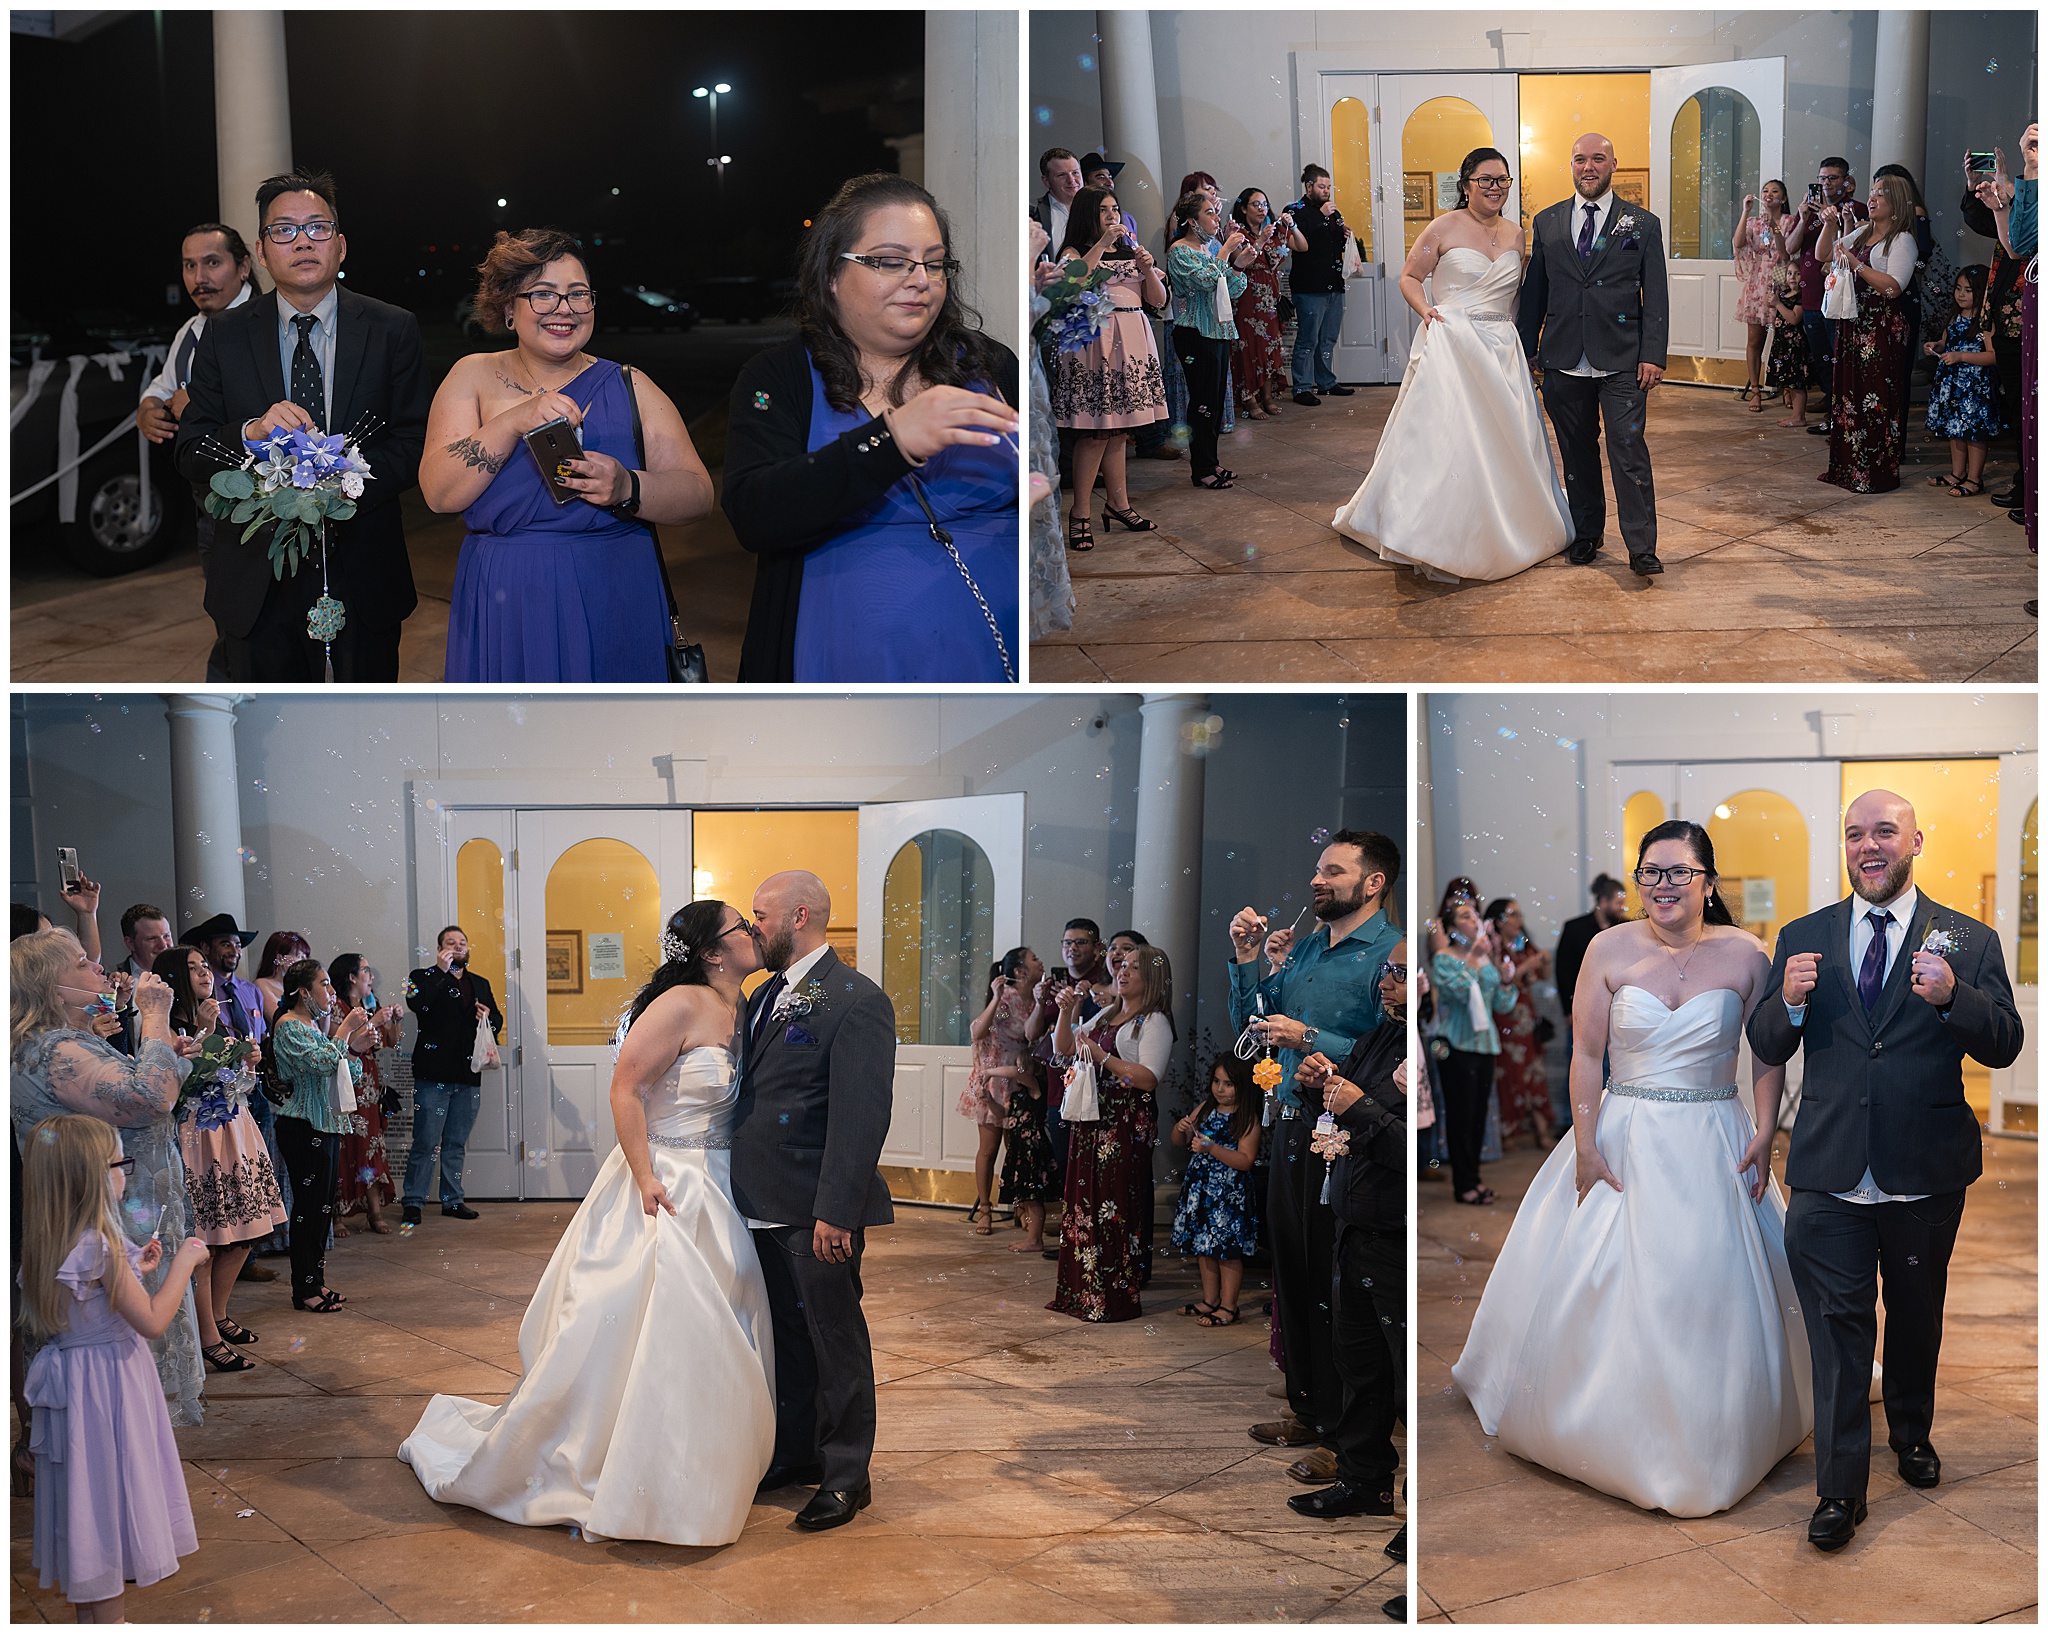 grand exit on wedding day at Ashton Gardens in Houston Texas by Swish and Click Photography